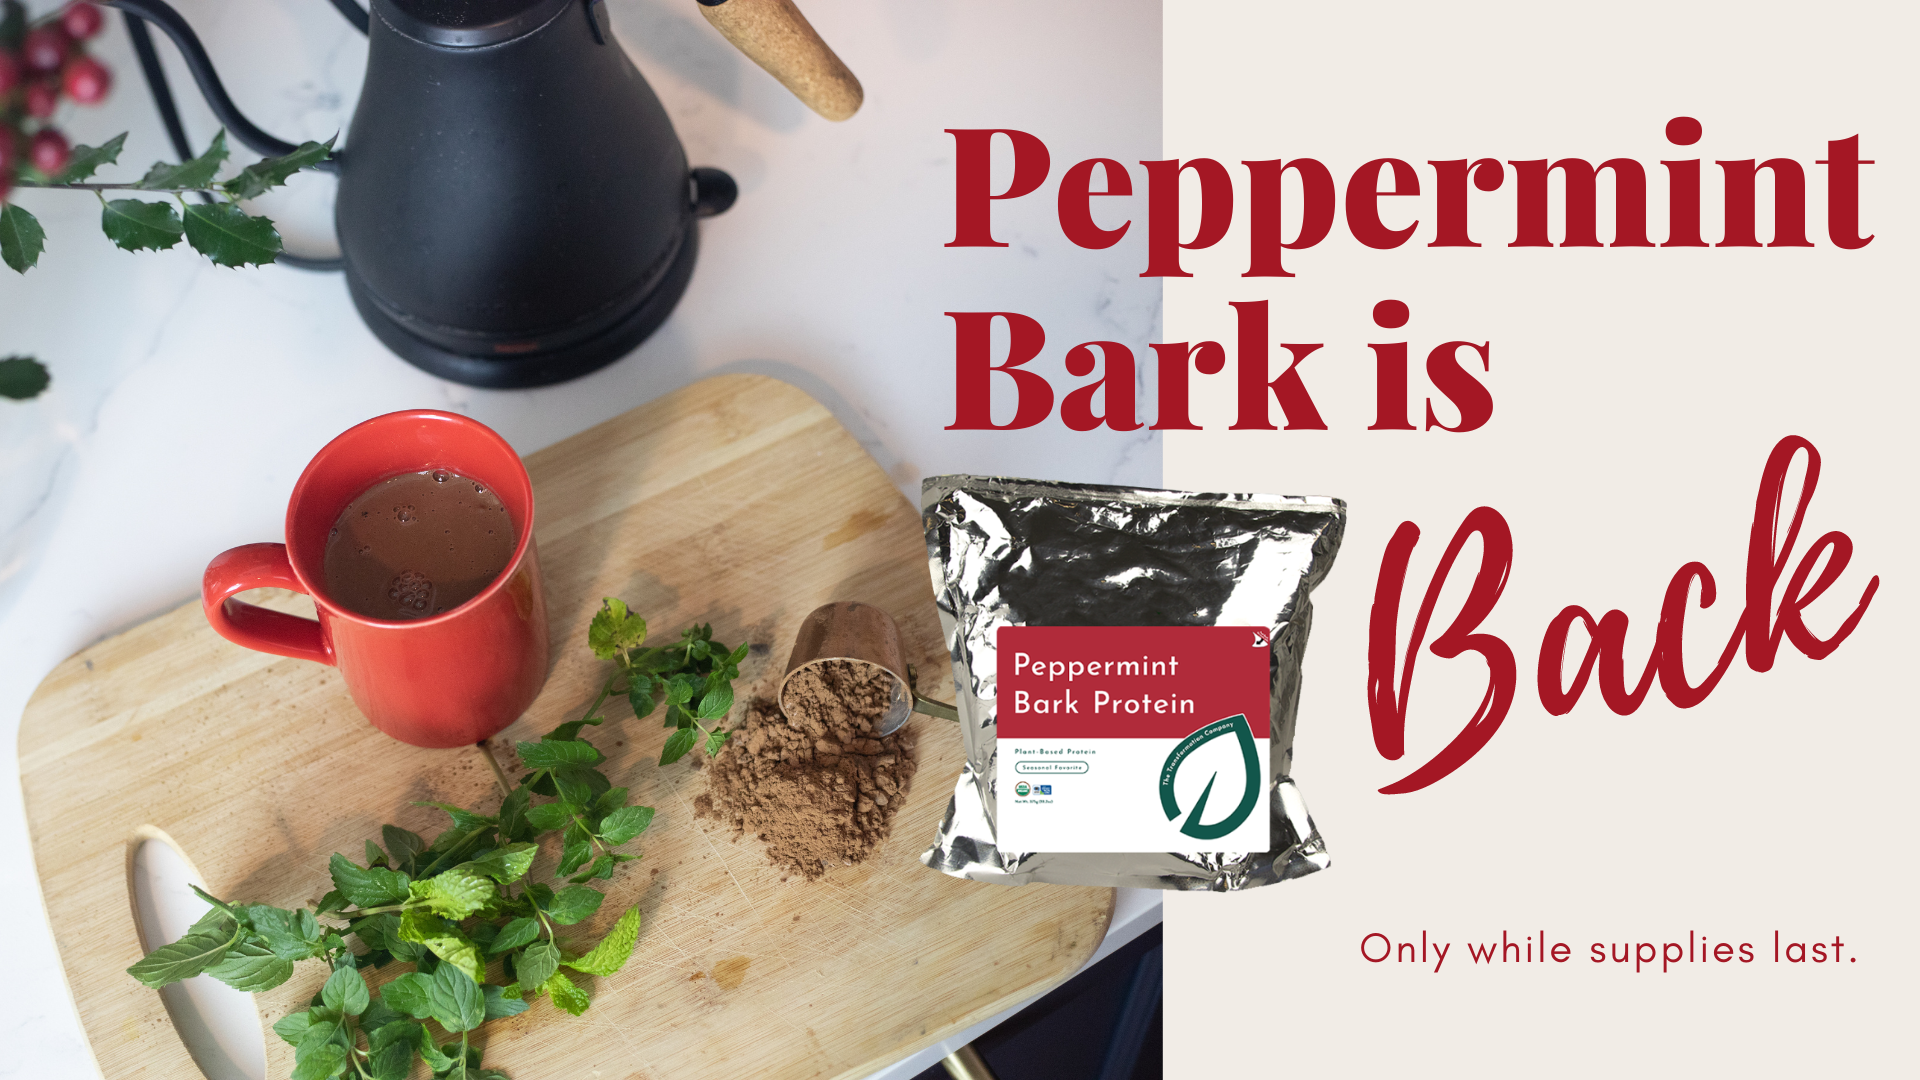 Purium’s Peppermint Bark Protein is Back!